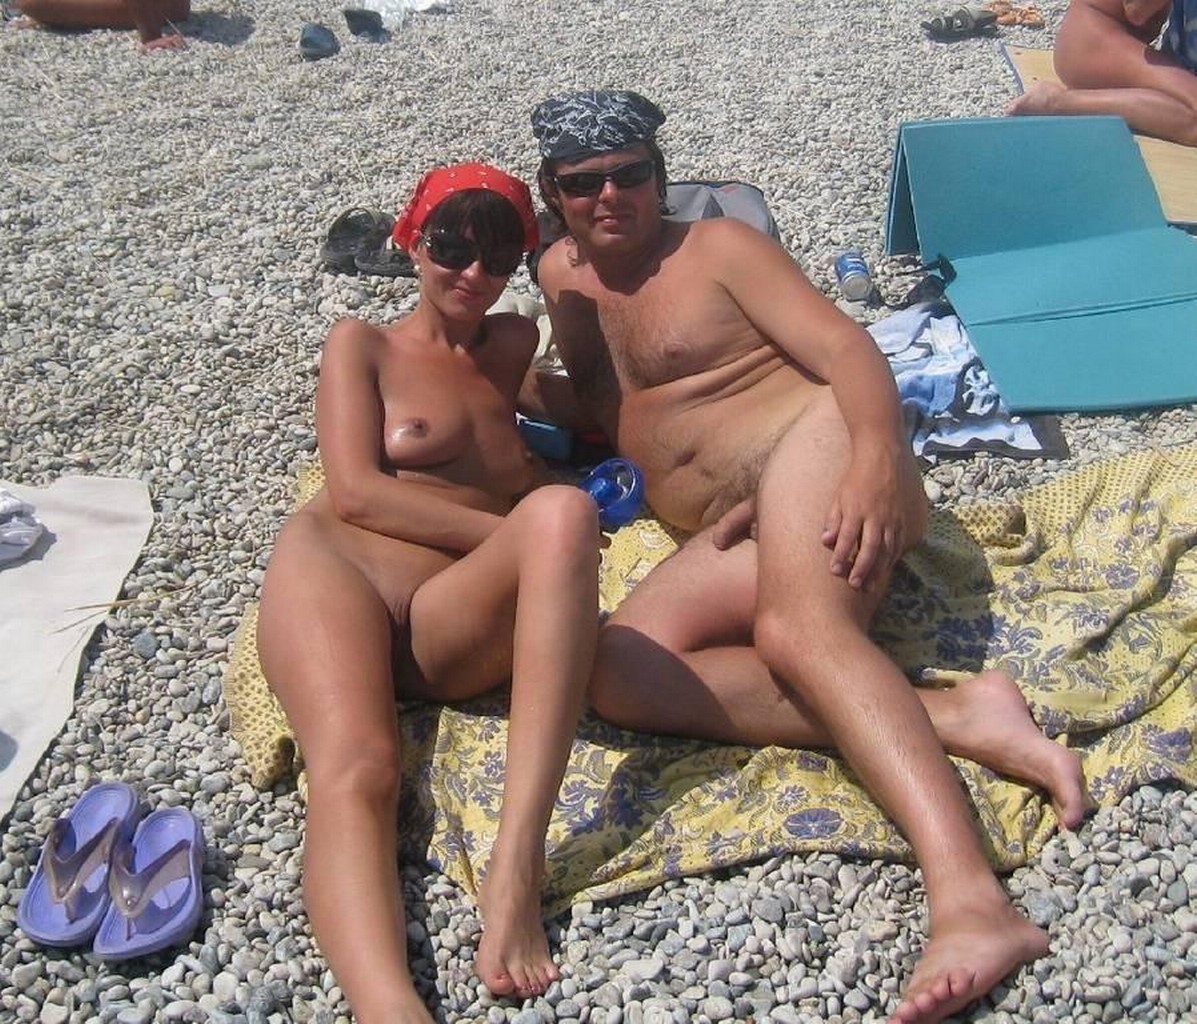 nudes girl: 25 Nudist couple images.